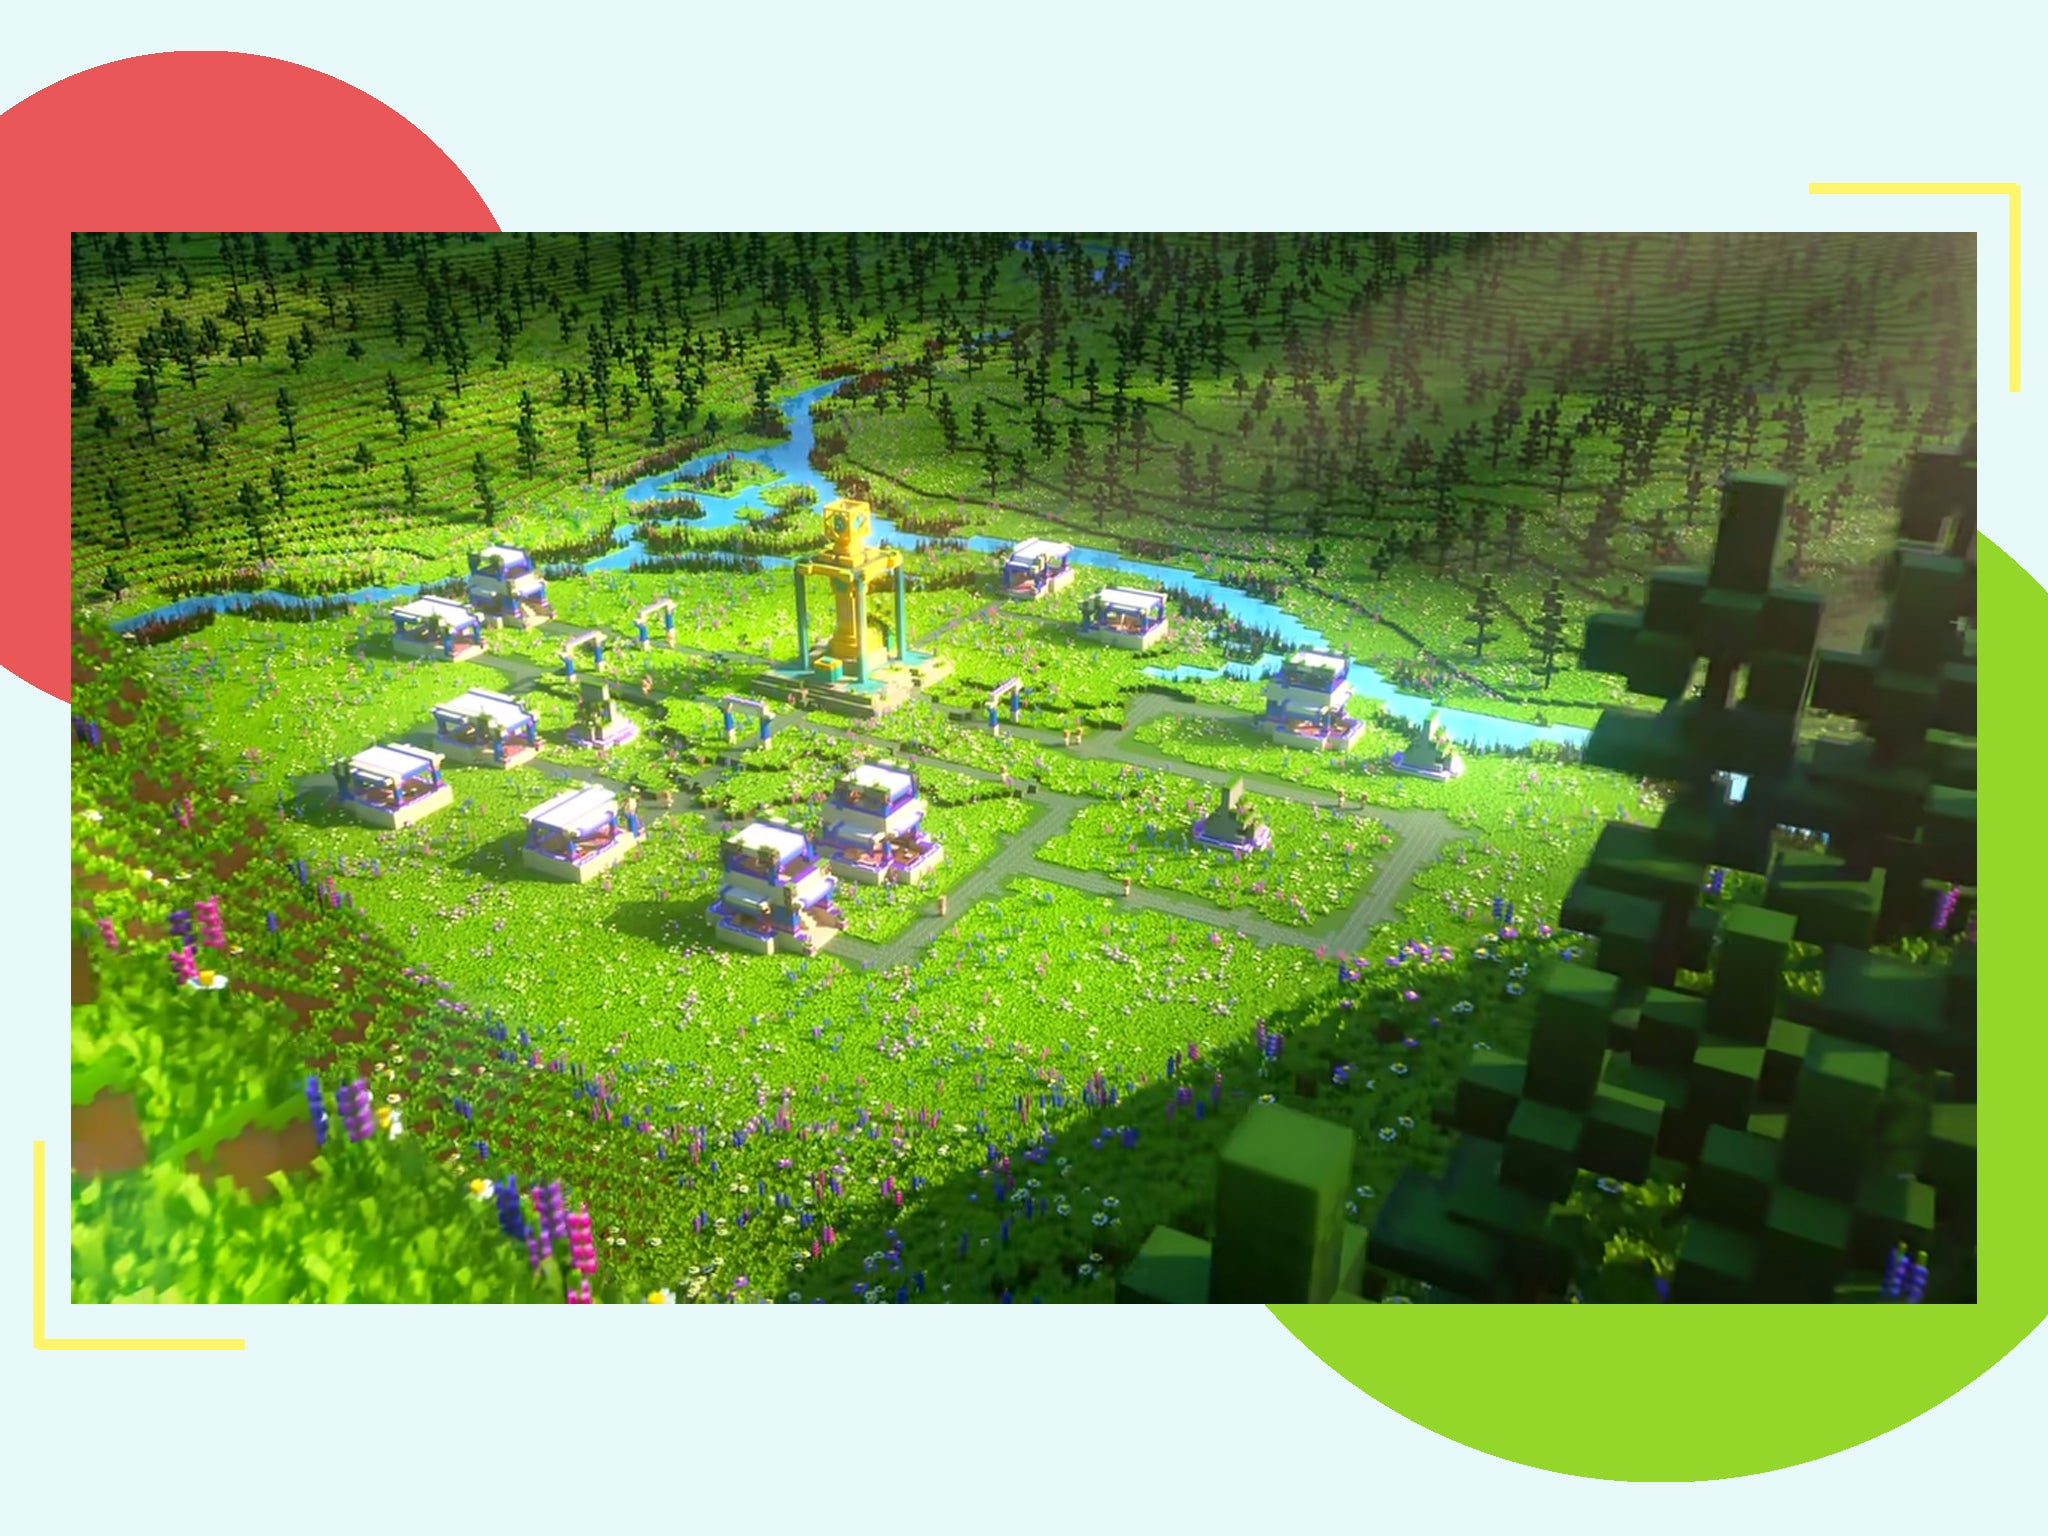 Launching in 2023, the game leans into Minecraft’s iconic, blocky art-style